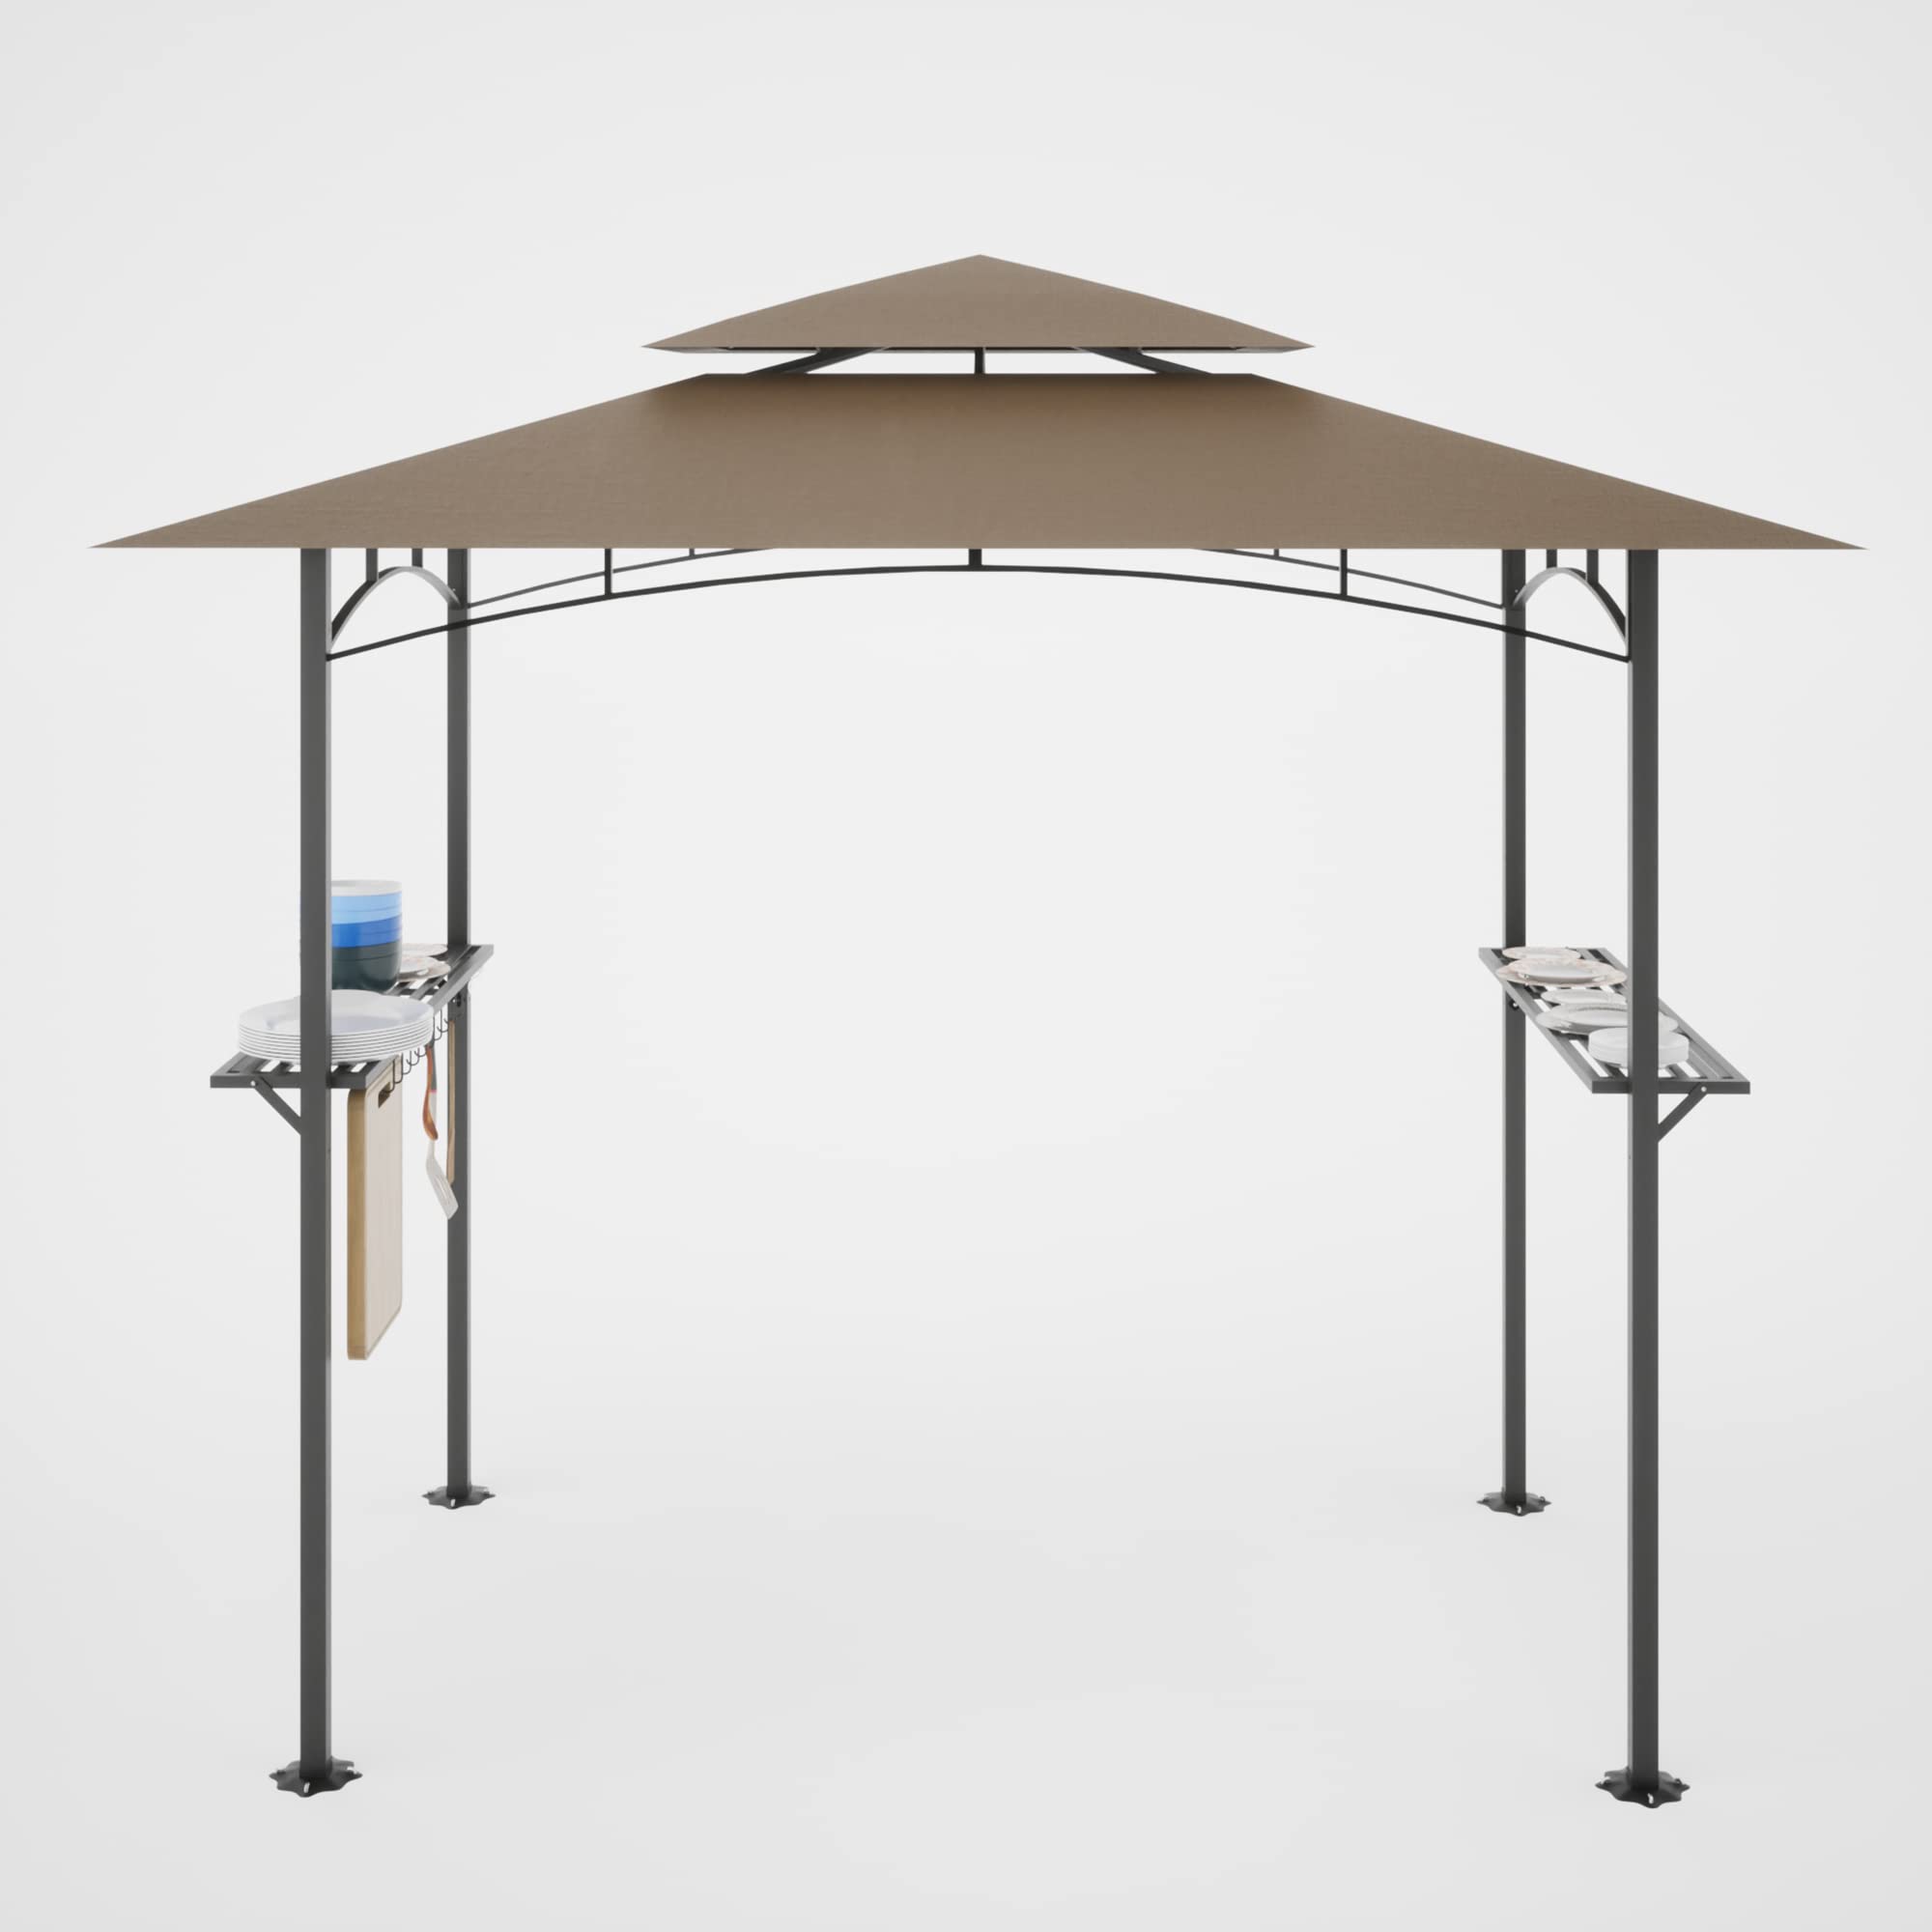 8 x 5 FT Grill Gazebo,Double Tiered Outdoor BBQ Gazebo with 2 Side Shelves,10 Hooks and Bottle Opener,Barbecue Grill Canopy Shelter for Patio Garden Beach Backyard Gatherings Parties (Khaki)